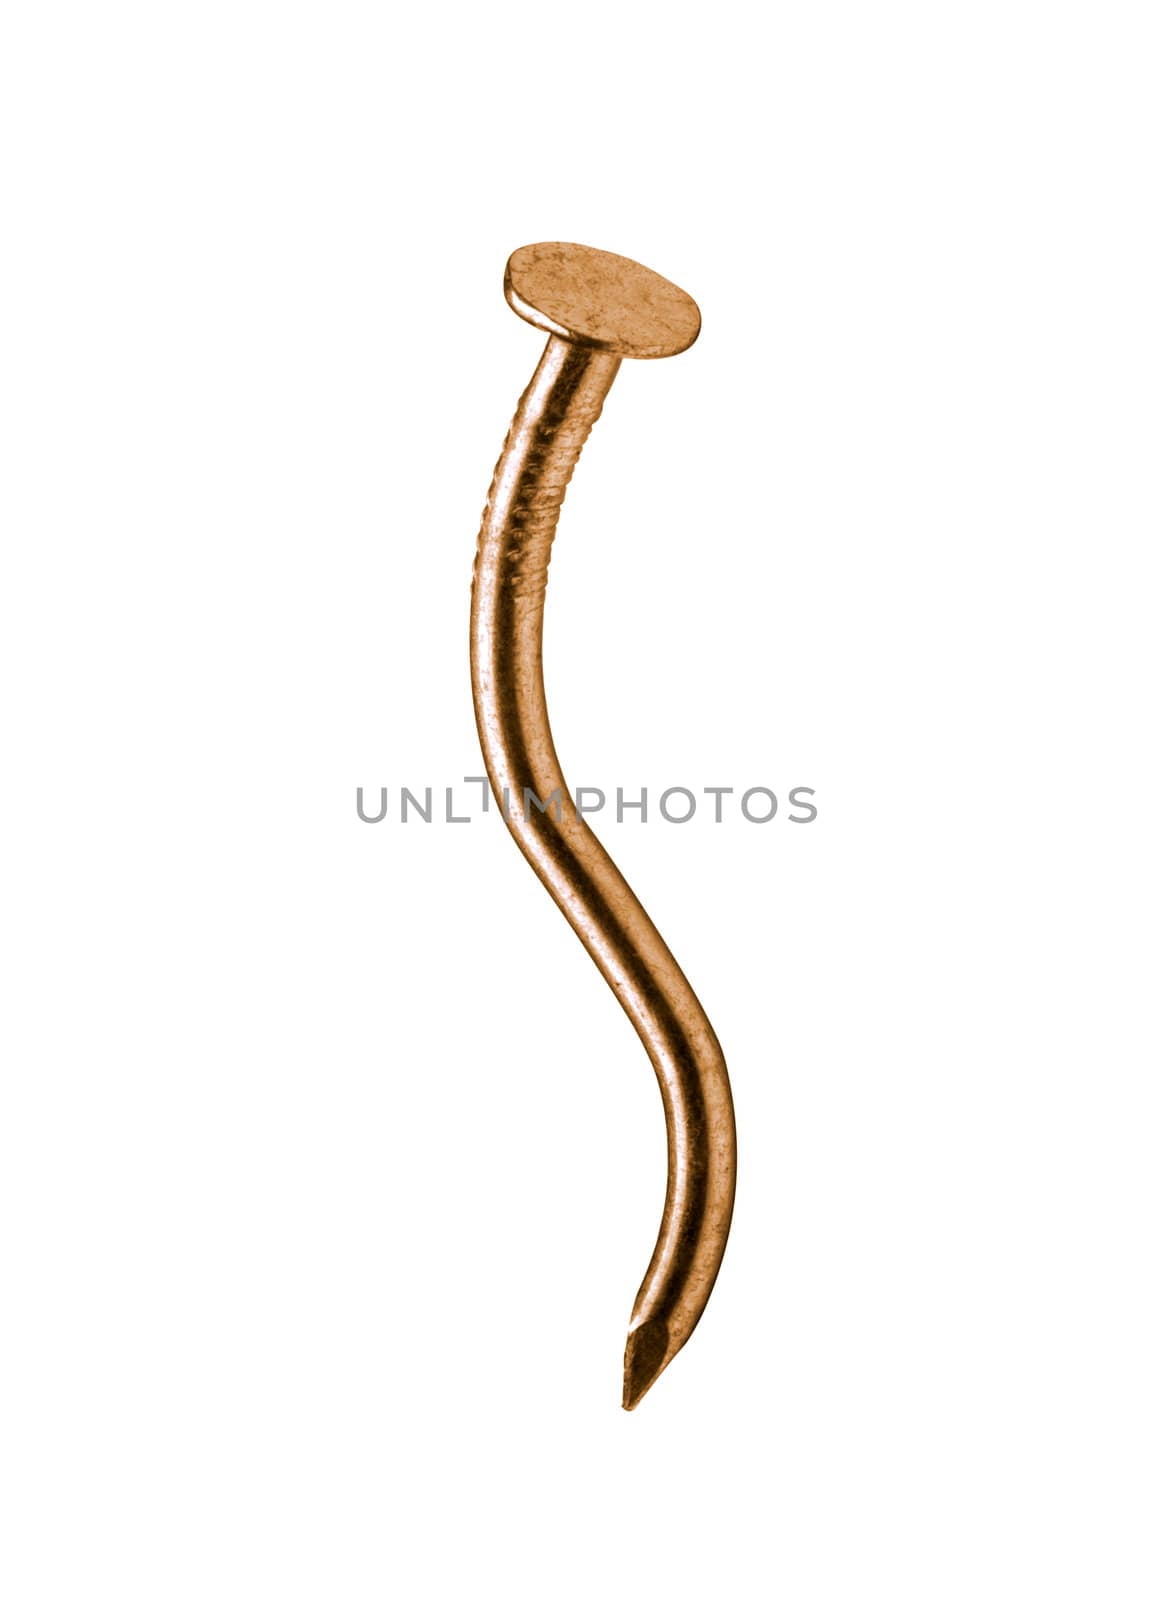 Rusty nail isolated on a white background